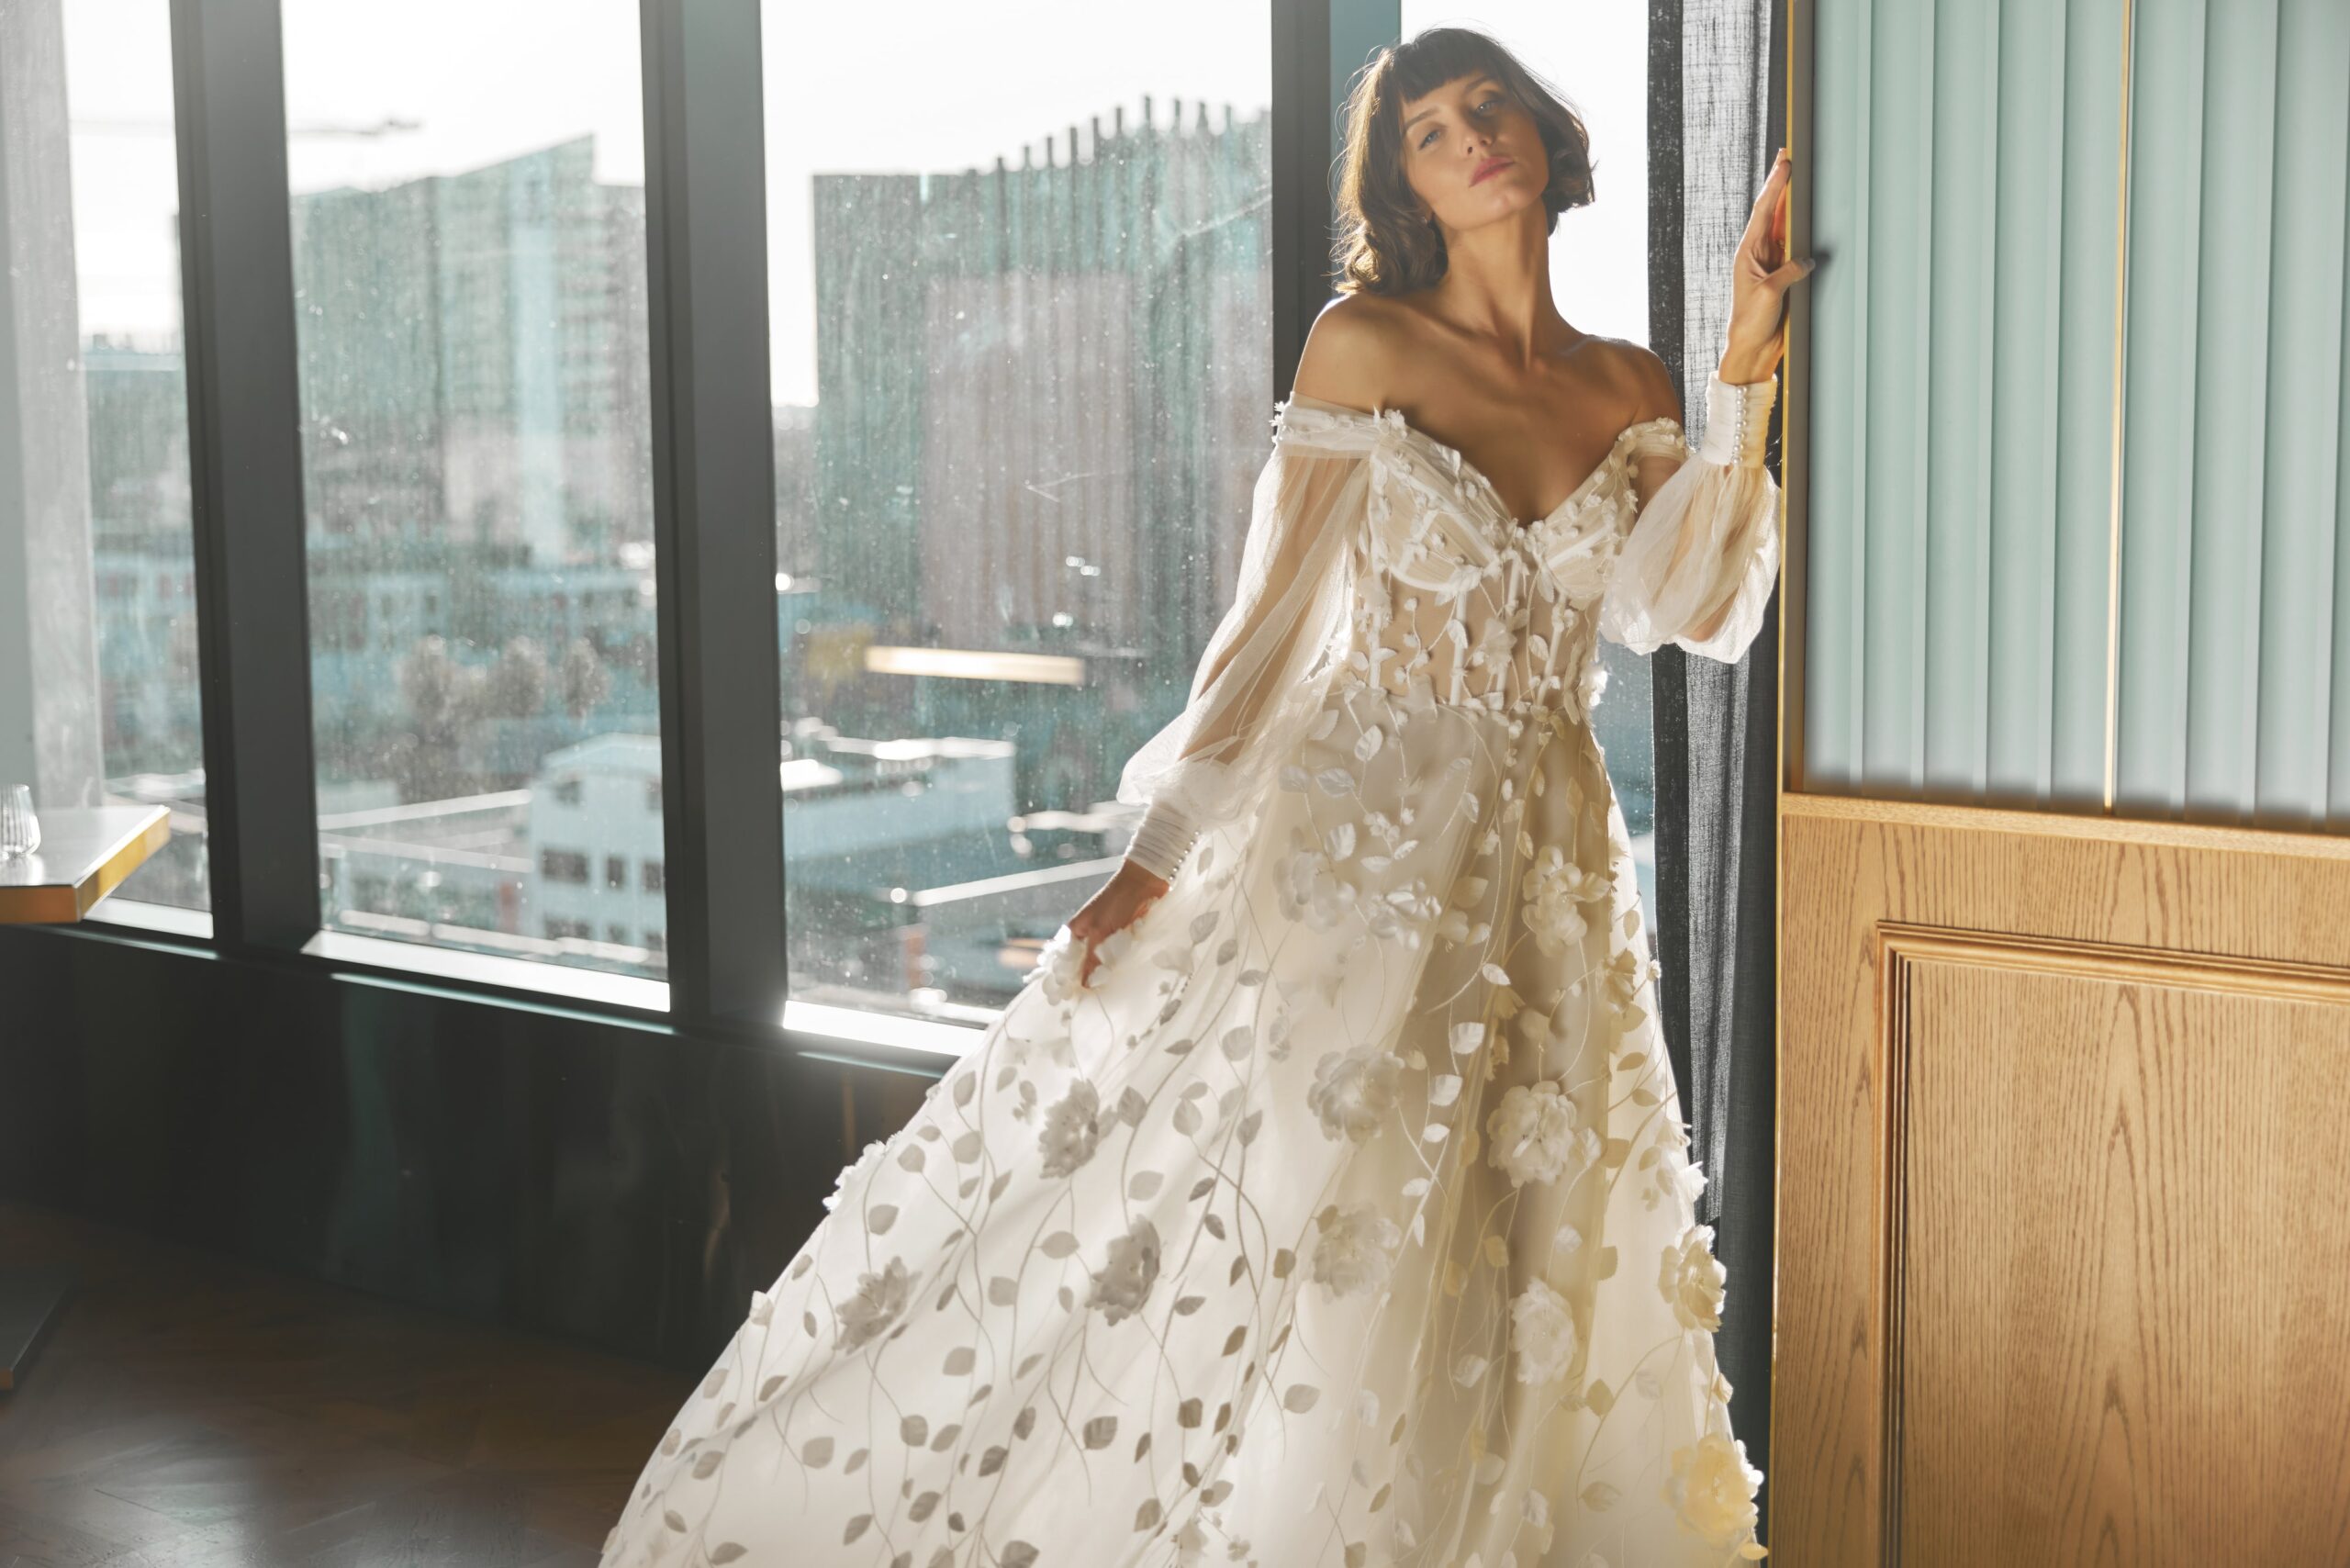 Florentine - a 3D floral lace gown with a sheer corset bodice, soft tulle off-the-shoulder sleeves and full skirt.